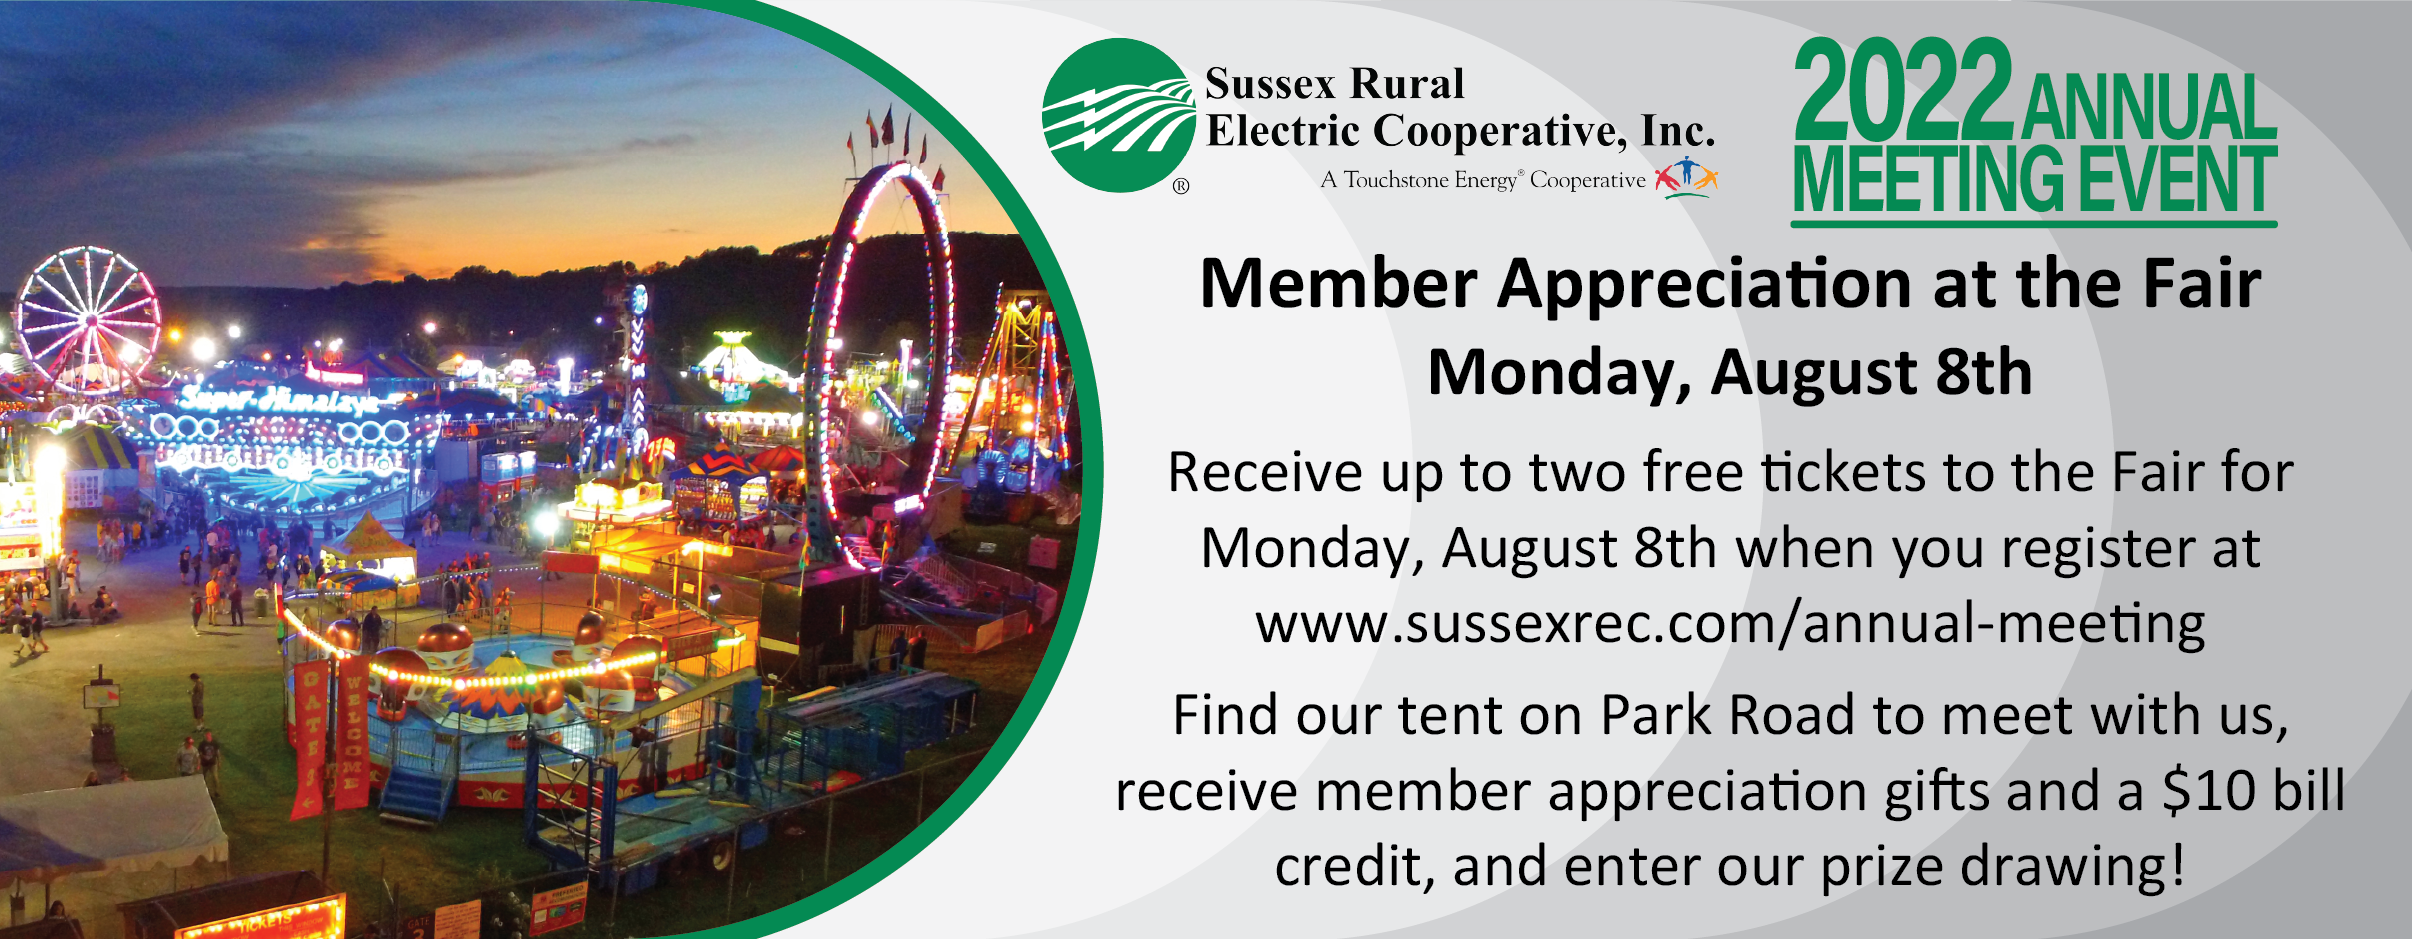 Ad reading: Sussex Rural Electric Cooperative Inc. 2022 Annual Meeting Event | Member Appreciation at the Fair | Monday, August 8th | Receive up to two free tickets to the Fair for Monday, August 8th when you register at www.sussexrec.com/annual-meeting. Find our tent on Park Road to meet with us, receive member appreciation gifts and a $10 bill credit, and enter our prize drawing!